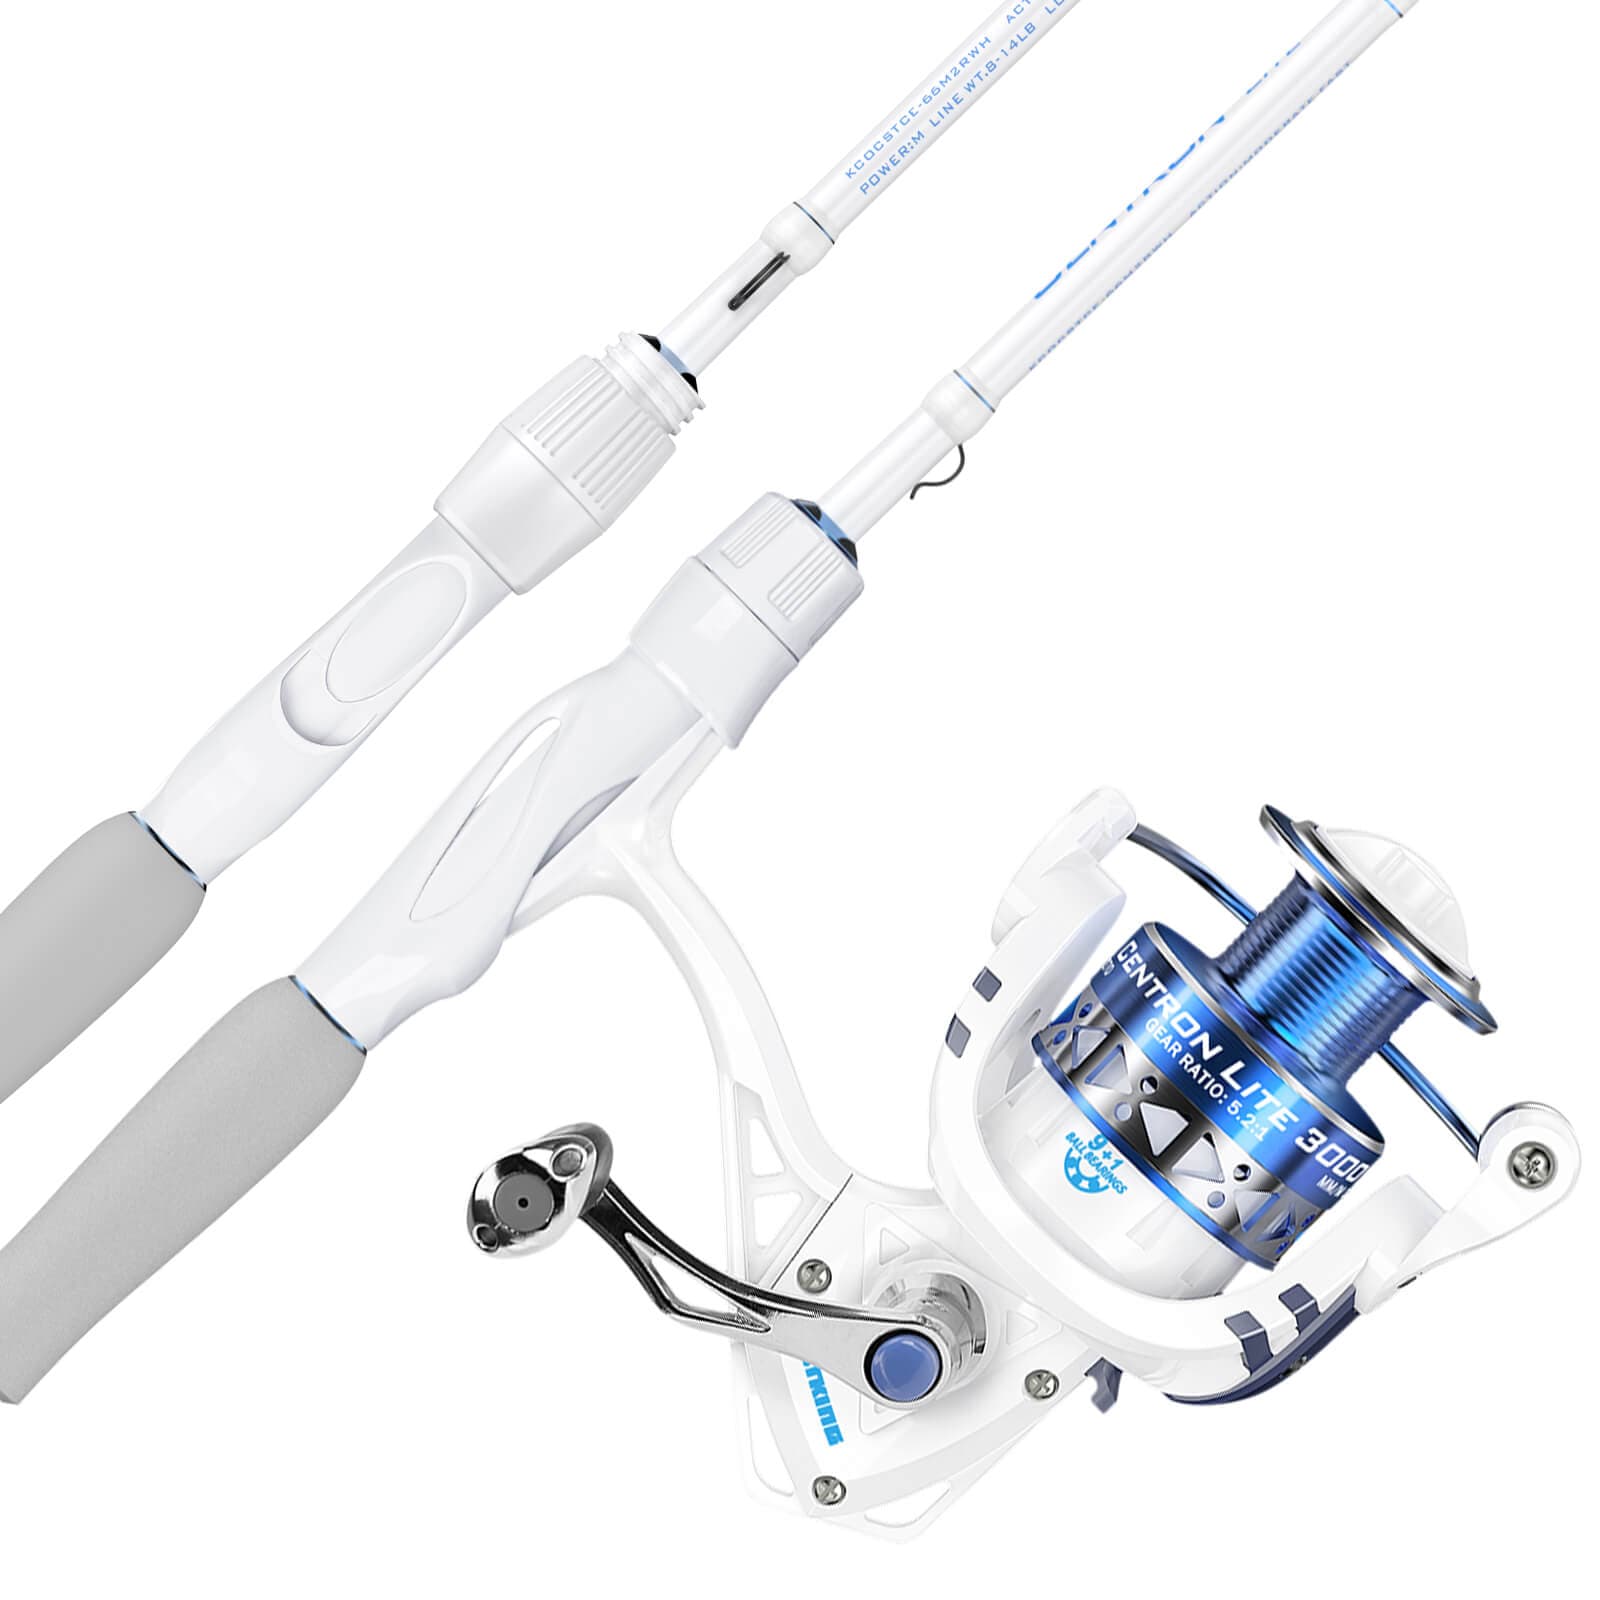 KastKing Centron Lite Spinning Rod and Reel Combo